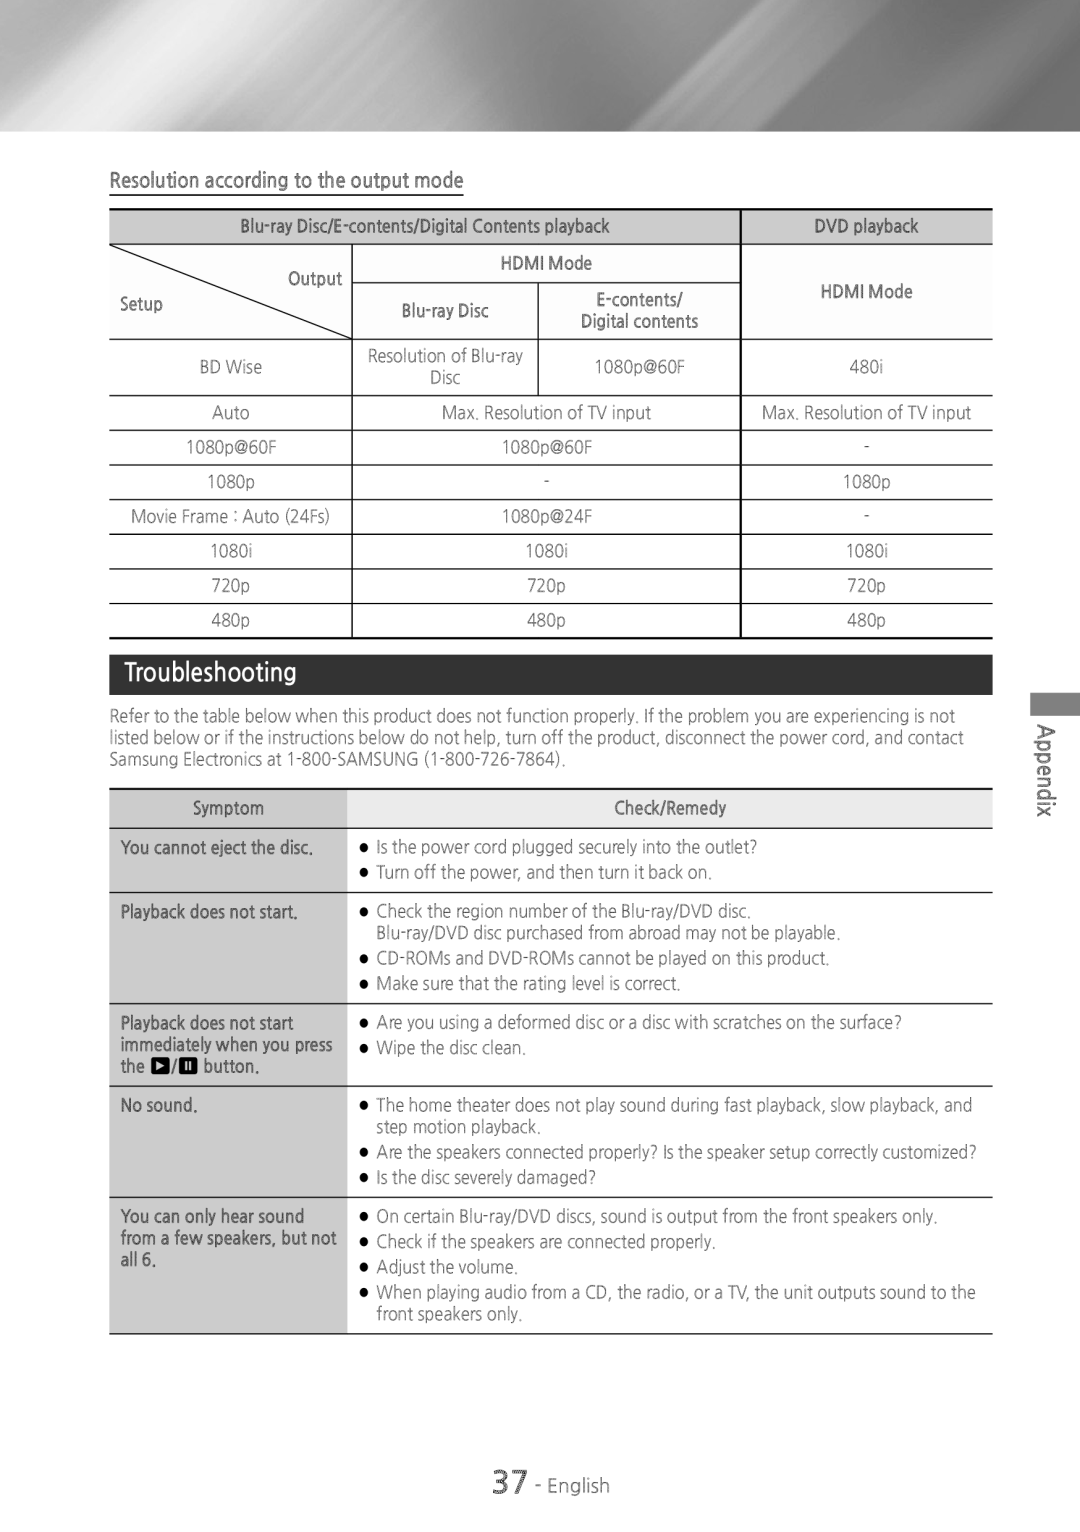 Samsung HT-H4500 user manual Troubleshooting, Resolution according to the output mode, Appendix 